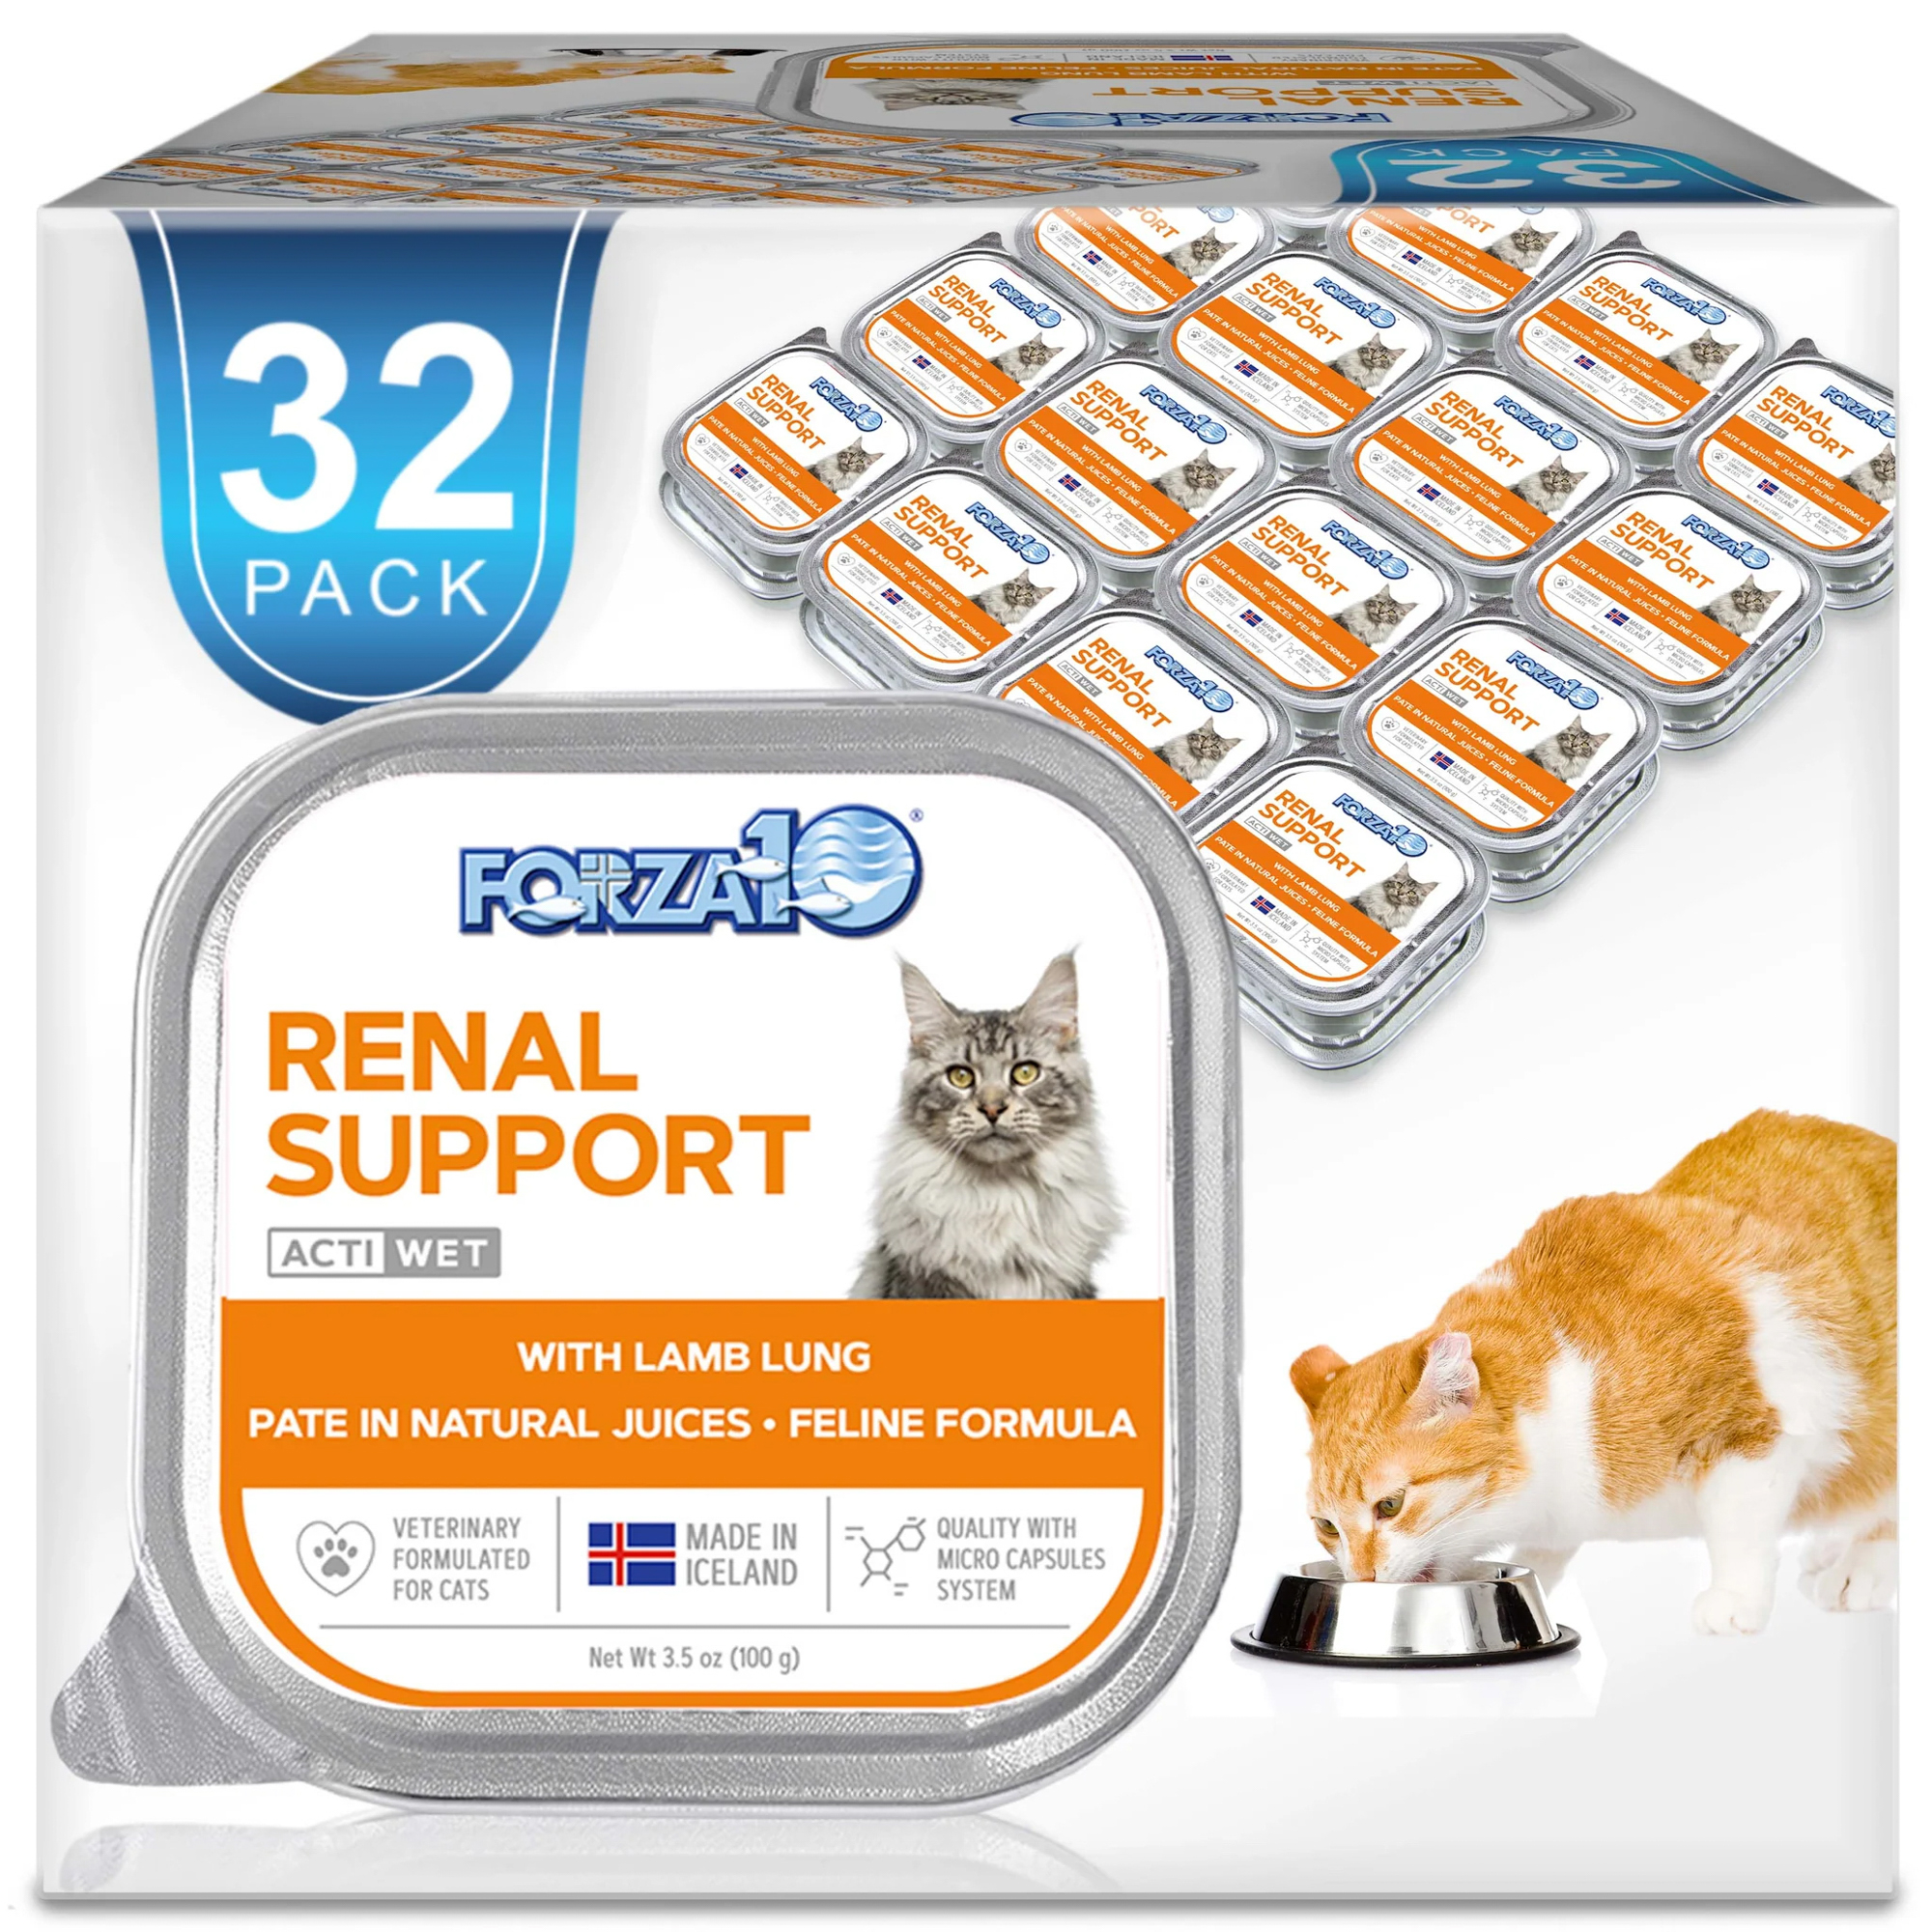 Forza10 Nutraceutic ActiWet Renal Support Lamb Recipe Canned Cat Food Usage